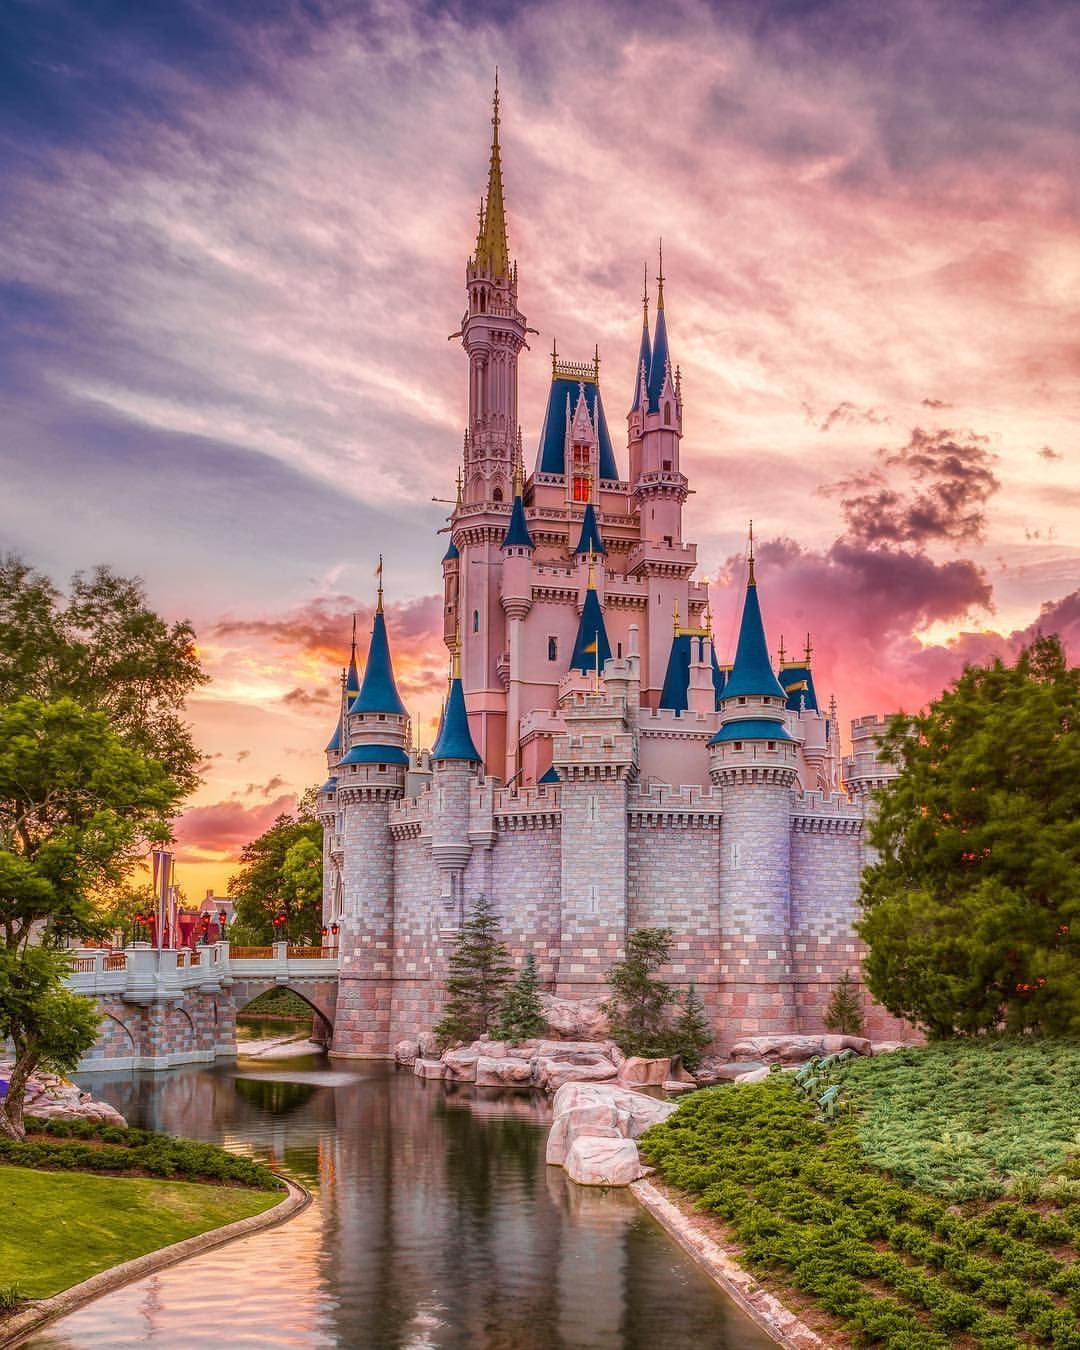 Sunset Castle Wallpapers